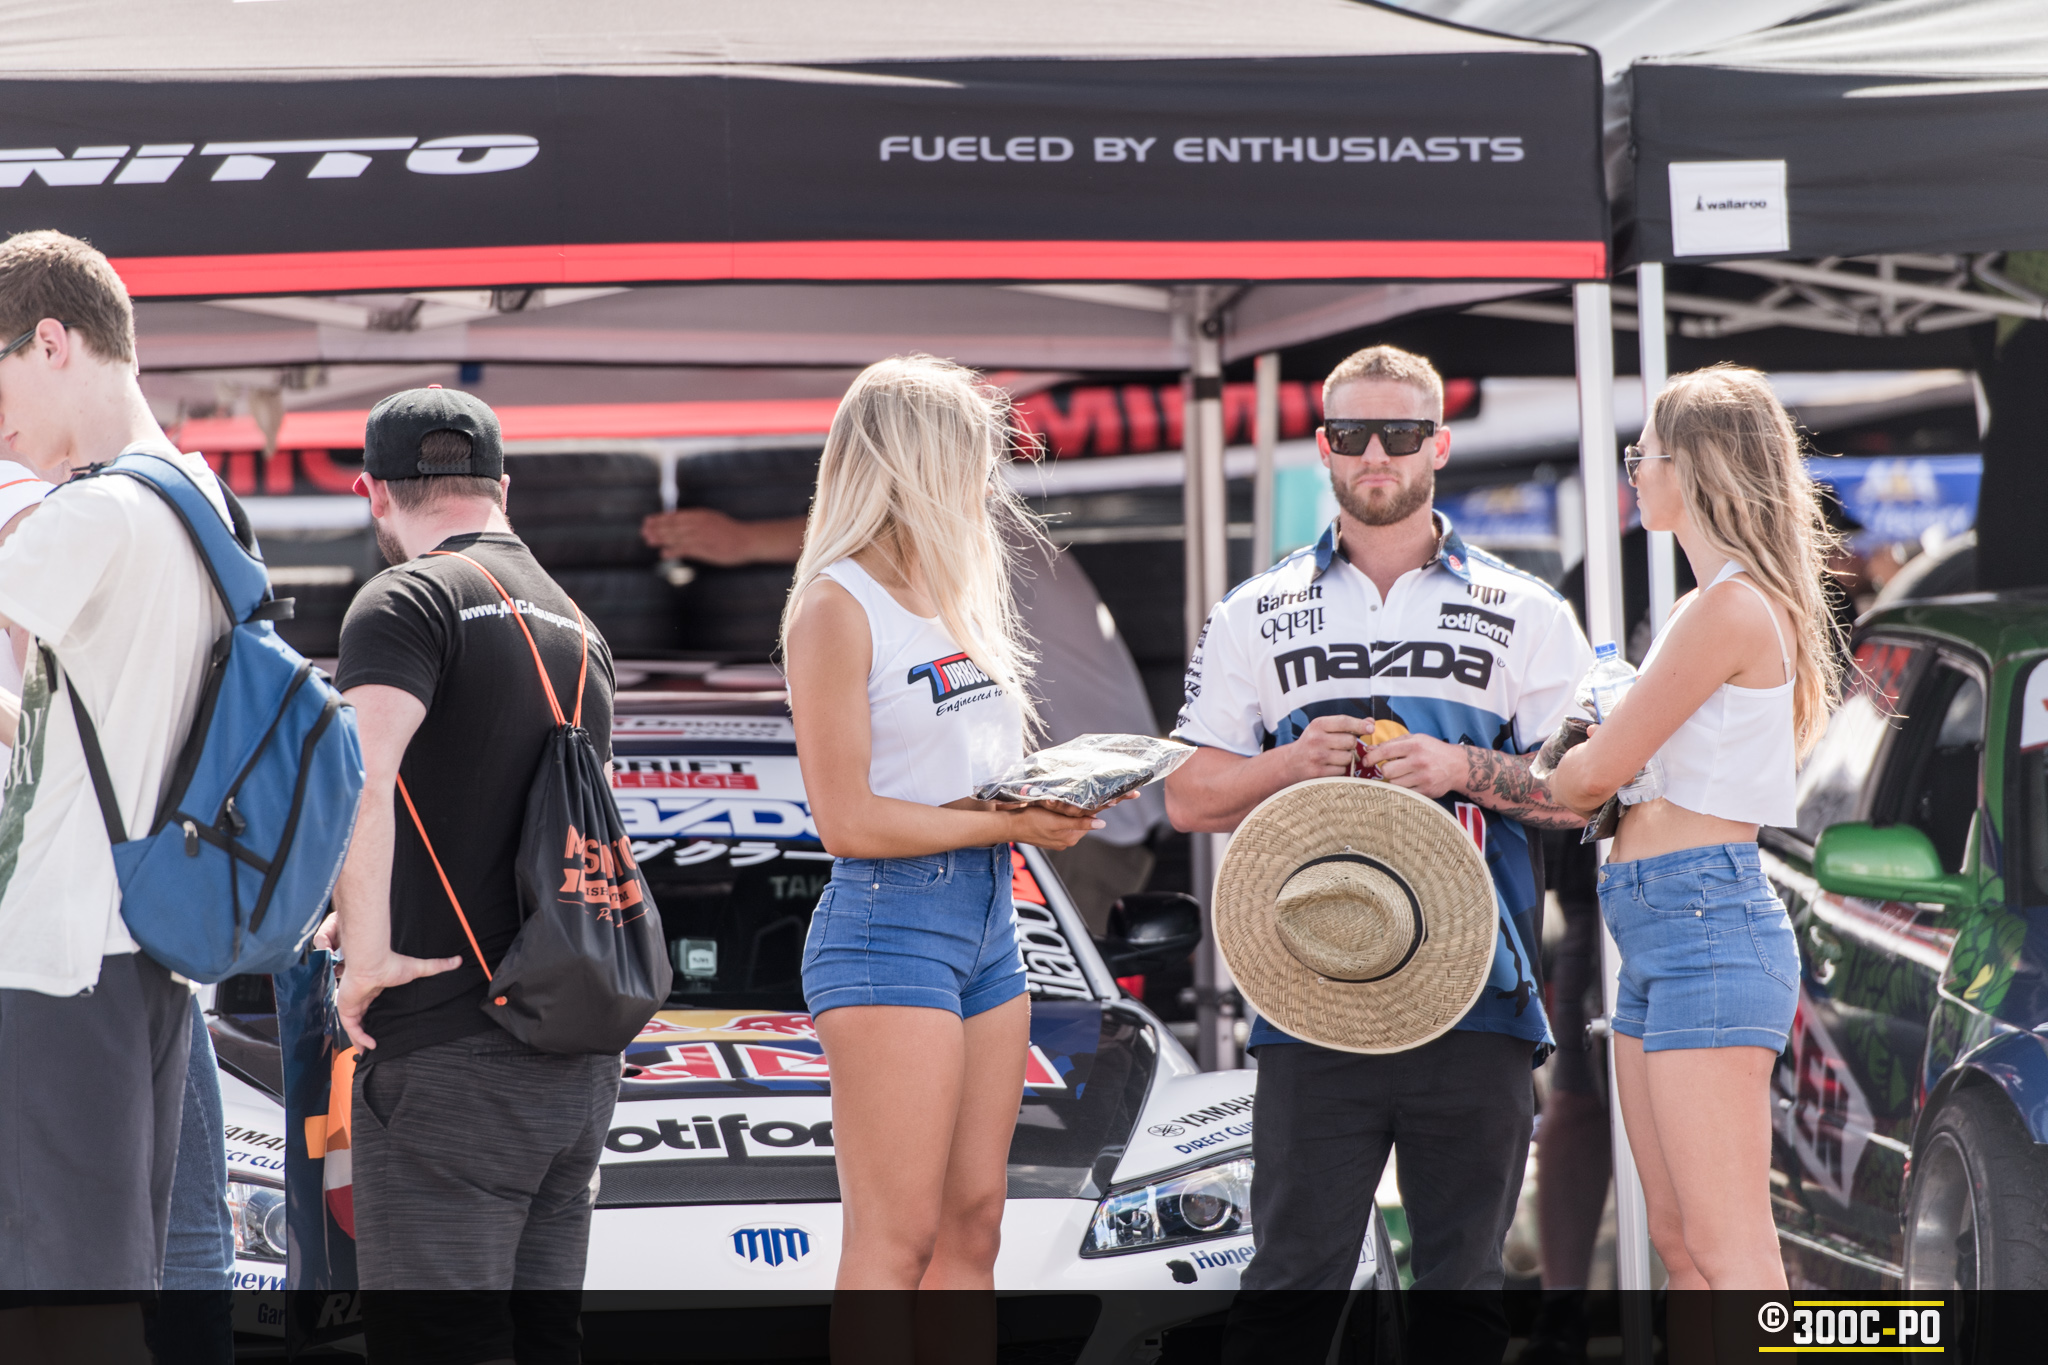 2017-10-13 - WTAC 2017 Day 01 057